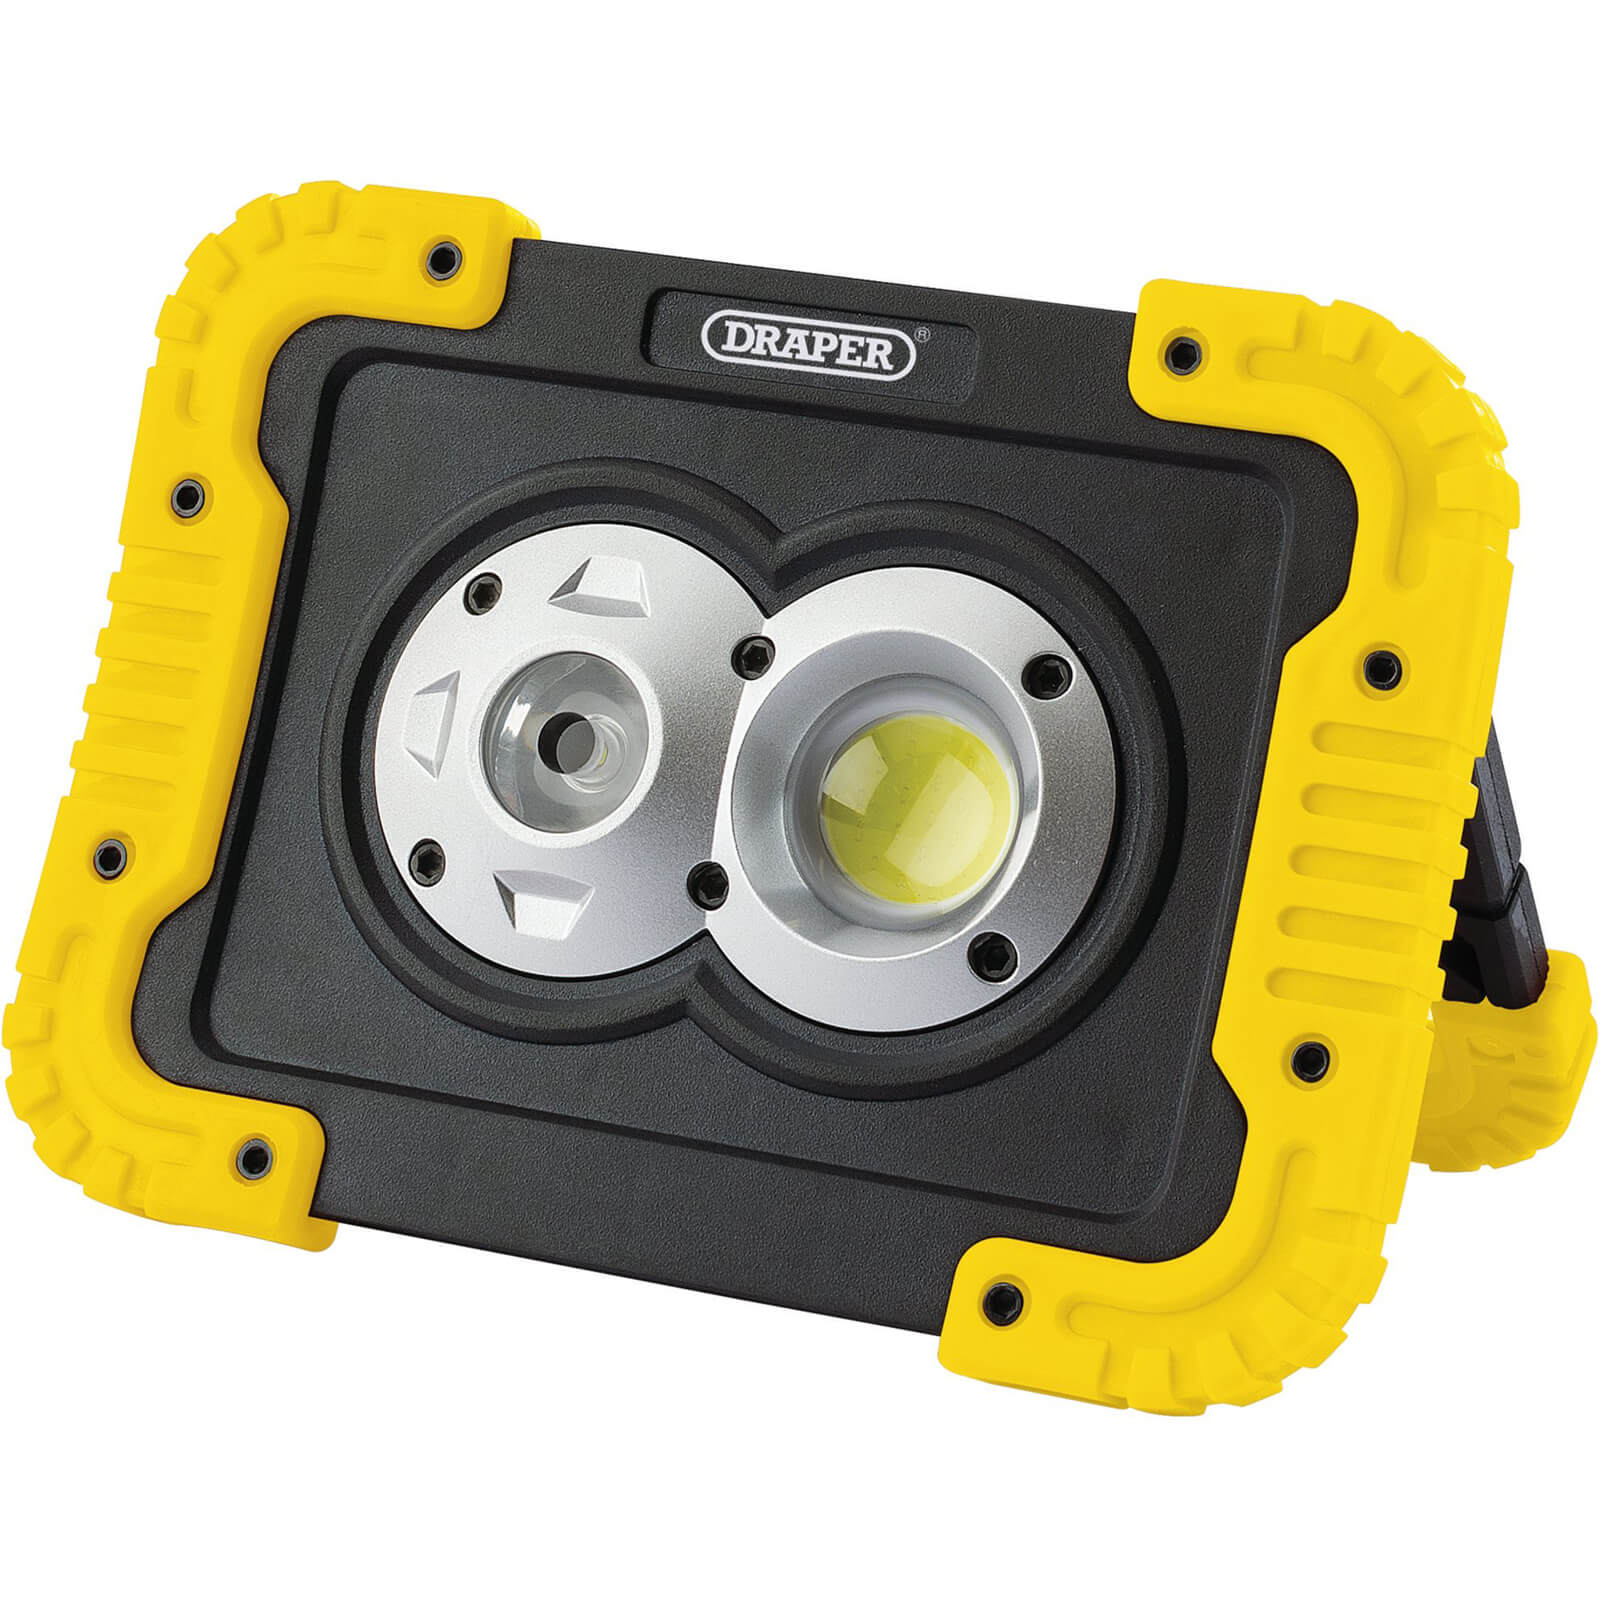 Photos - Floodlight / Garden Lamps Draper Rechargeable COB LED Worklight and Powerbank 87737 